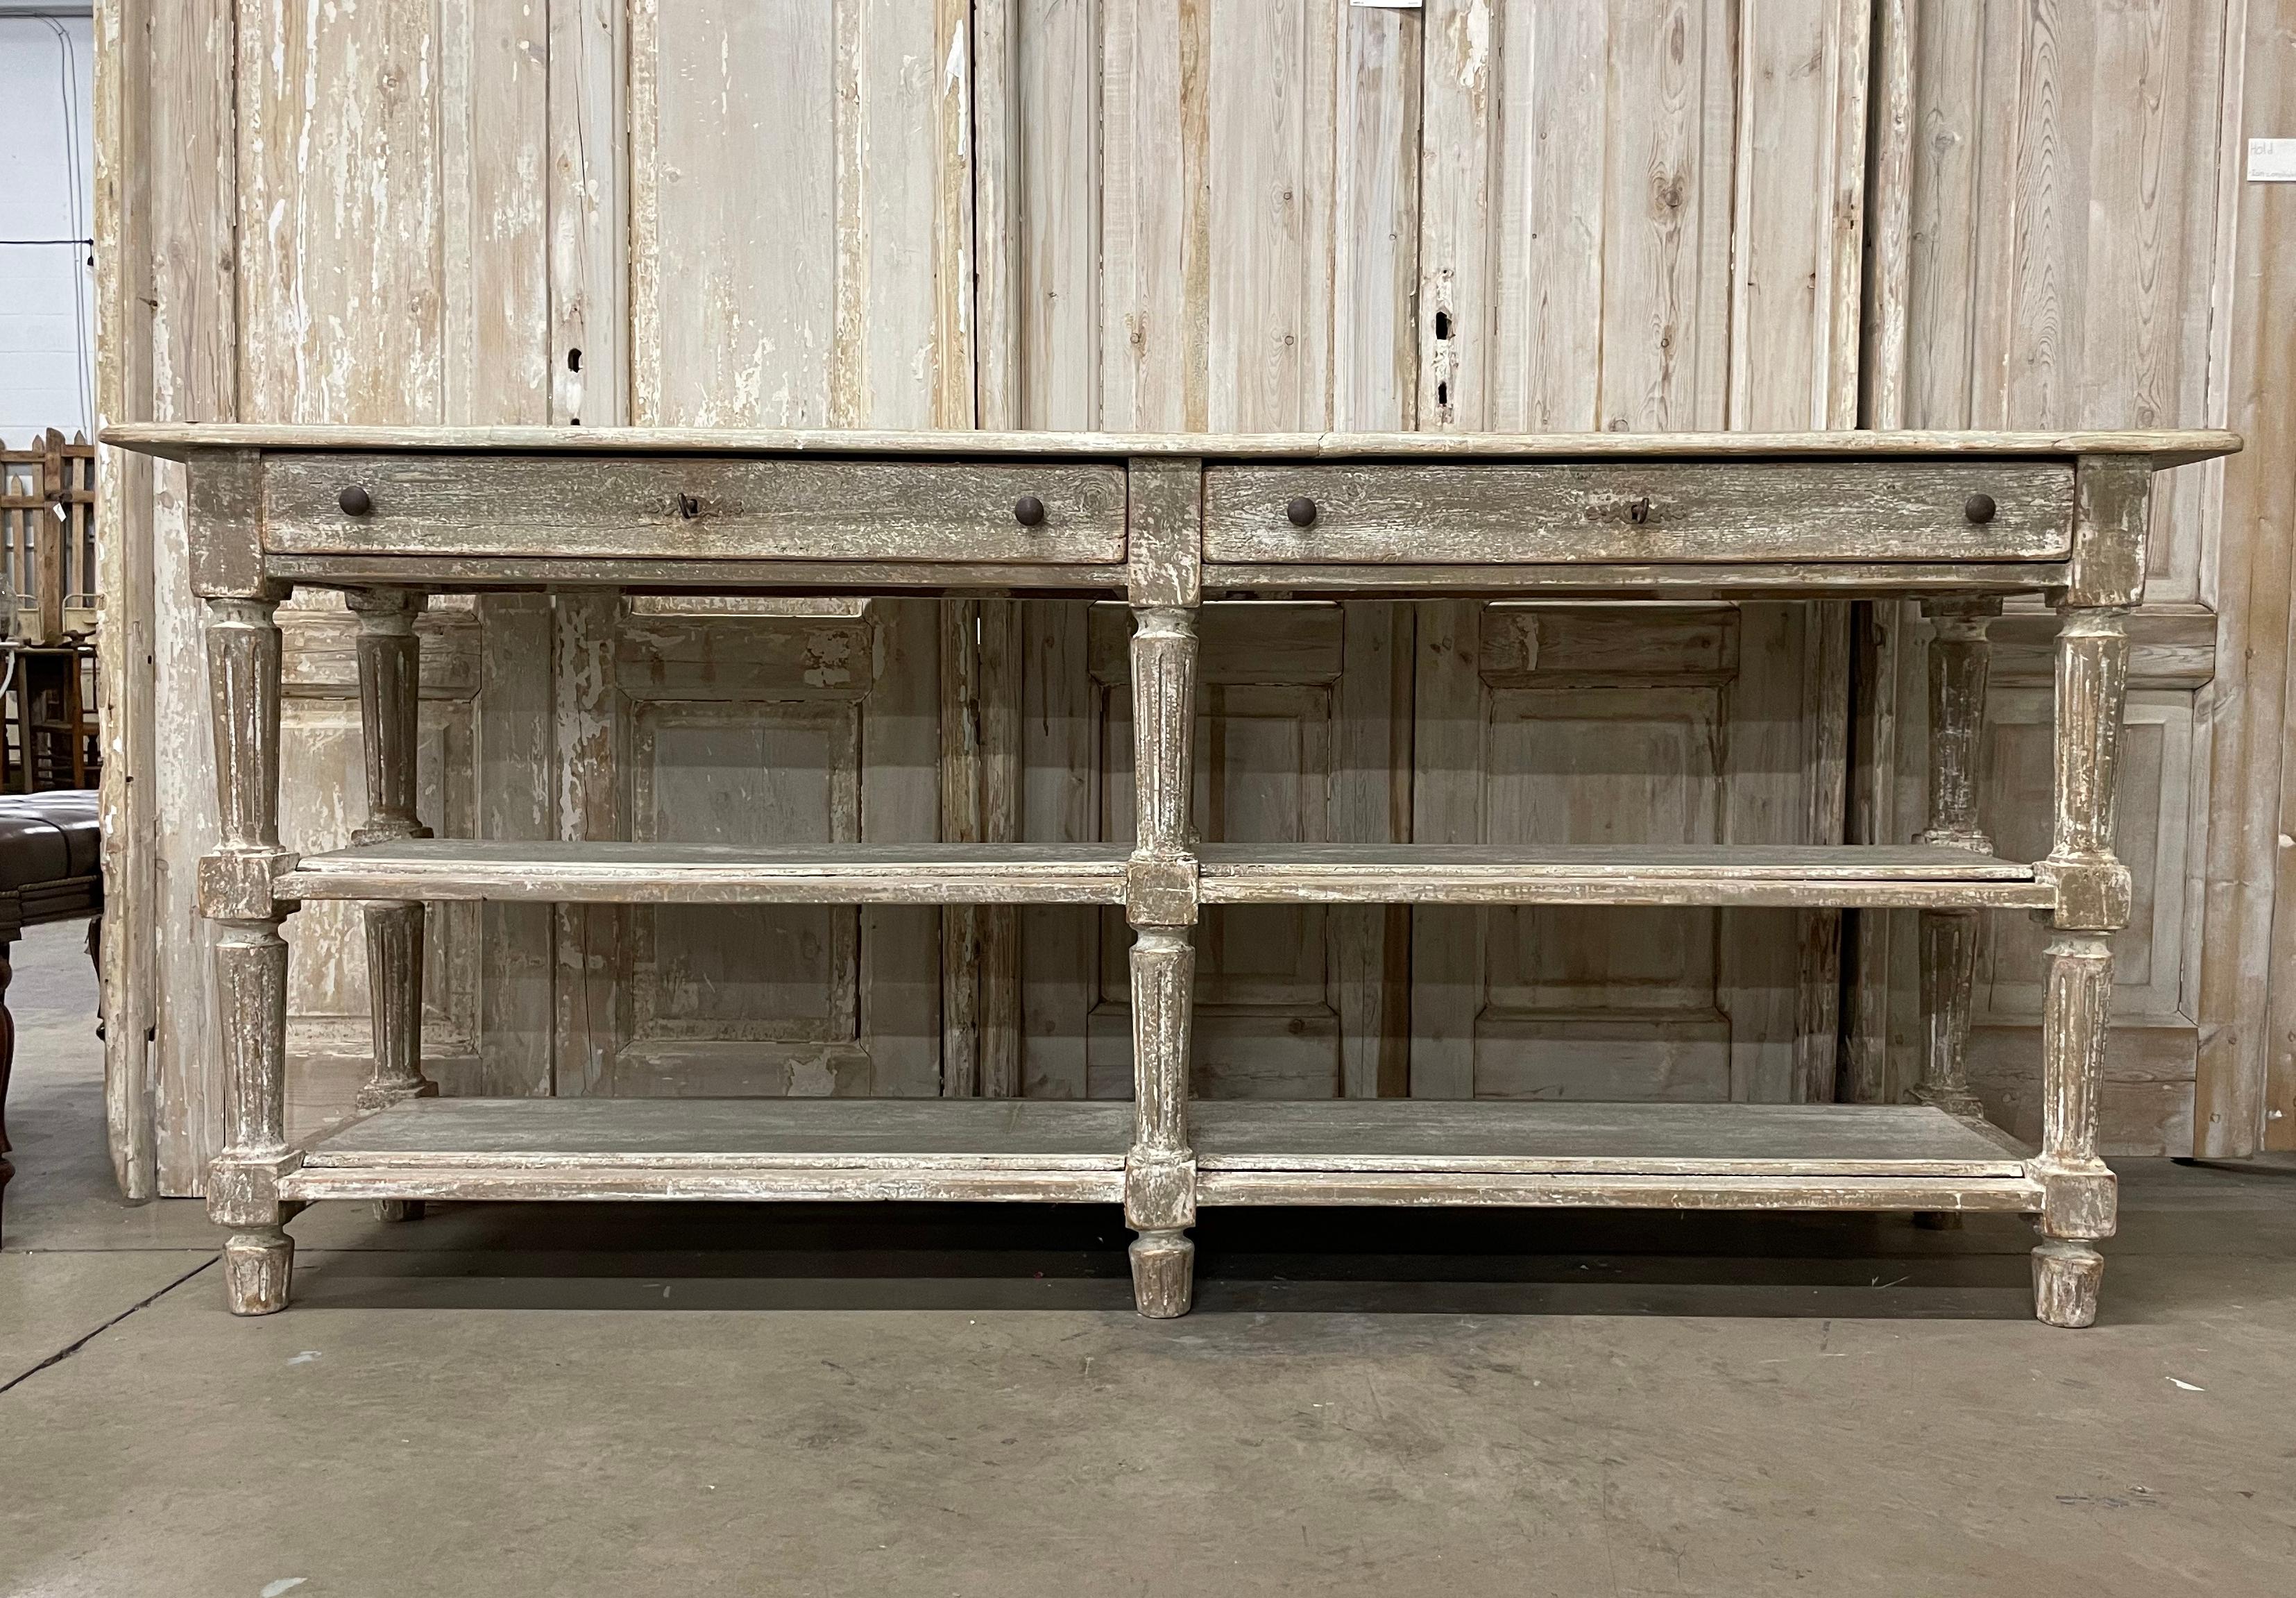 Rare antique scraped back draper's table from the Provence region of France.  It is very substantial with 2 long shelves below 2 drawers with its original keys.

It is a versatile piece of furniture and can be used in a number of design applications